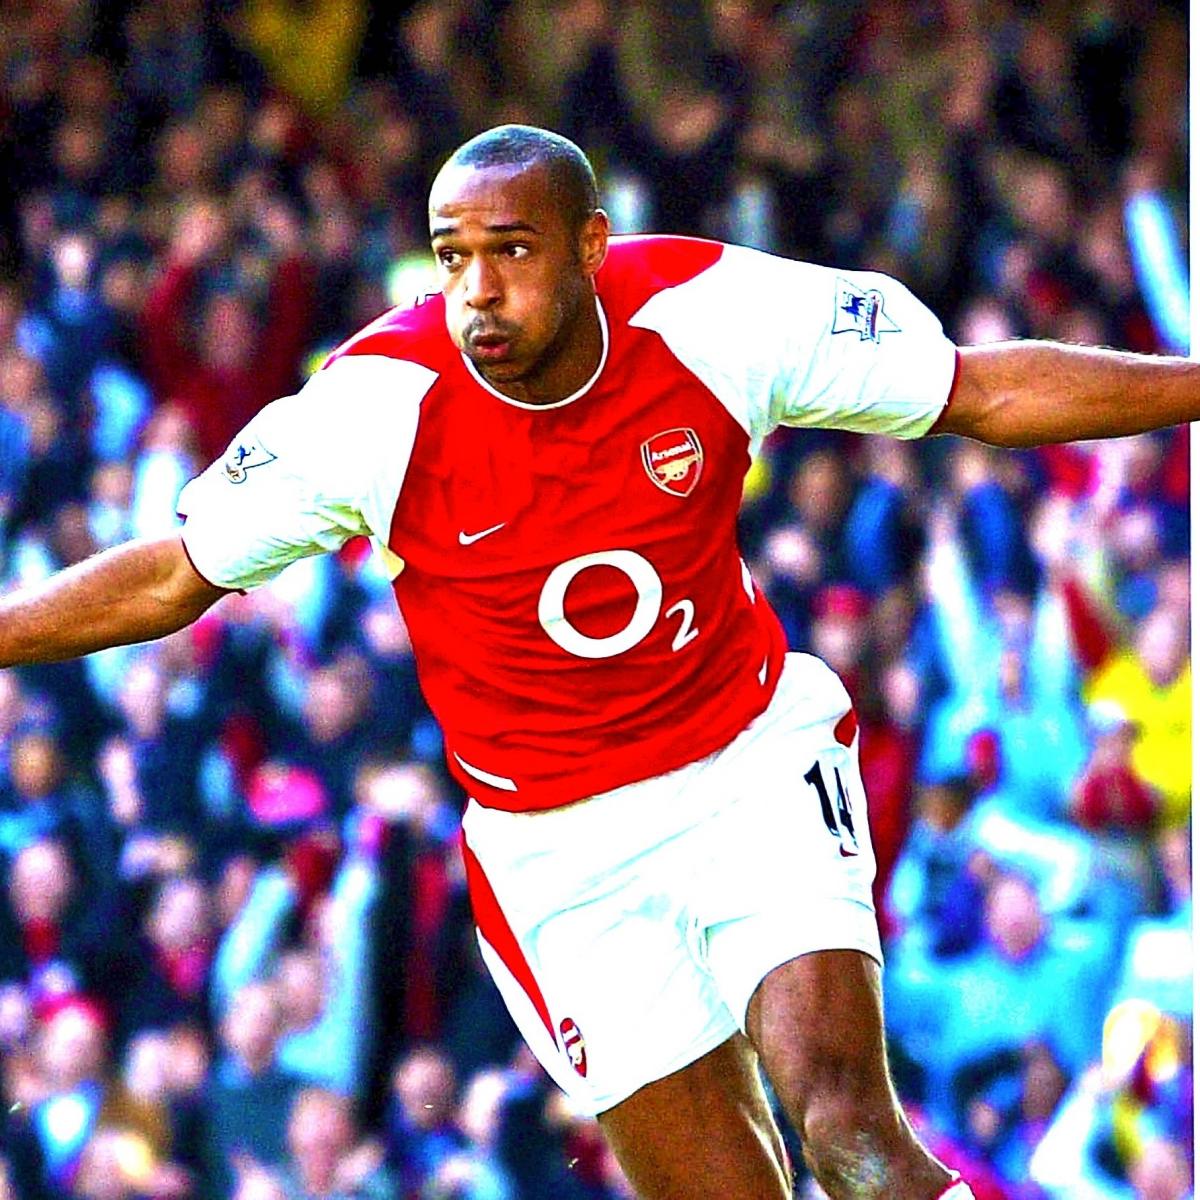 Arsenal's 10 most expensive transfers of all time